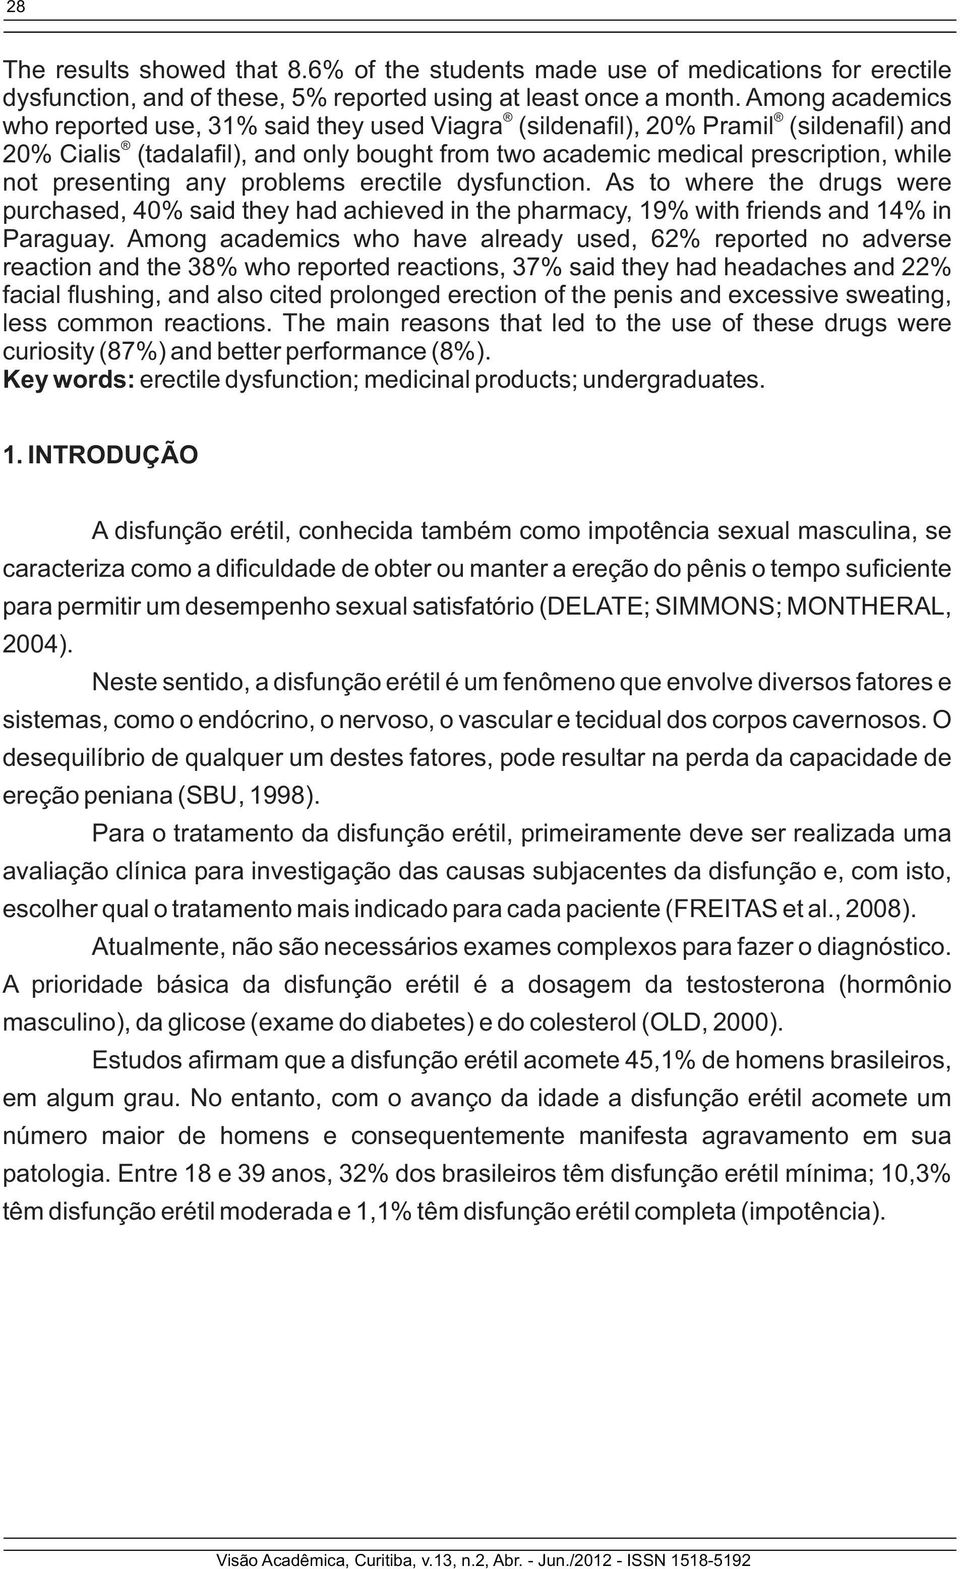 any problems erectile dysfunction. As to where the drugs were purchased, 40% said they had achieved in the pharmacy, 19% with friends and 14% in Paraguay.